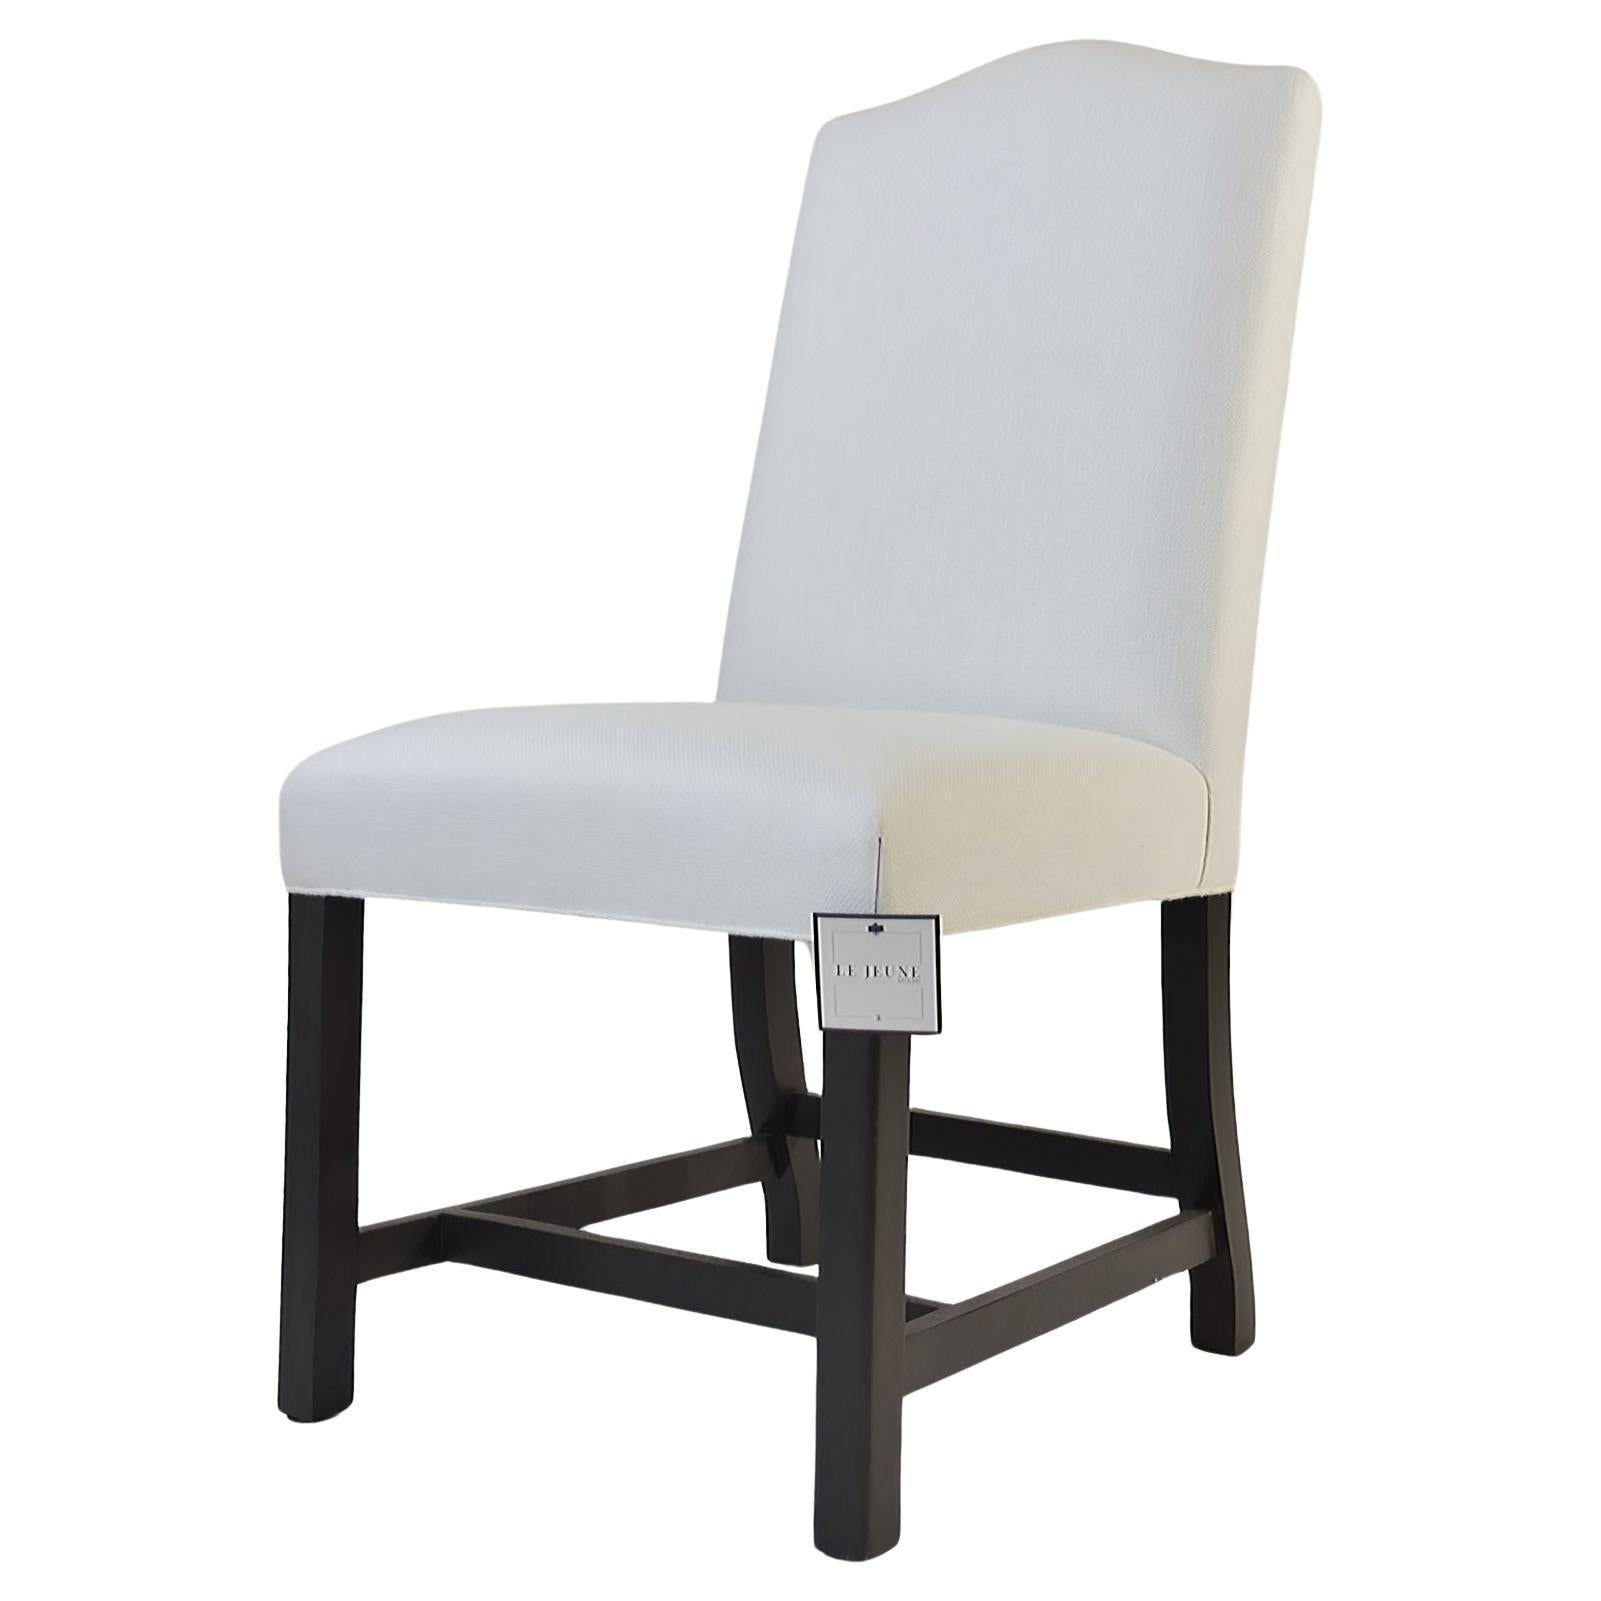 Le Jeune Upholstery Hampshire Armless Dining Side Chair DC1.923 Showroom Model